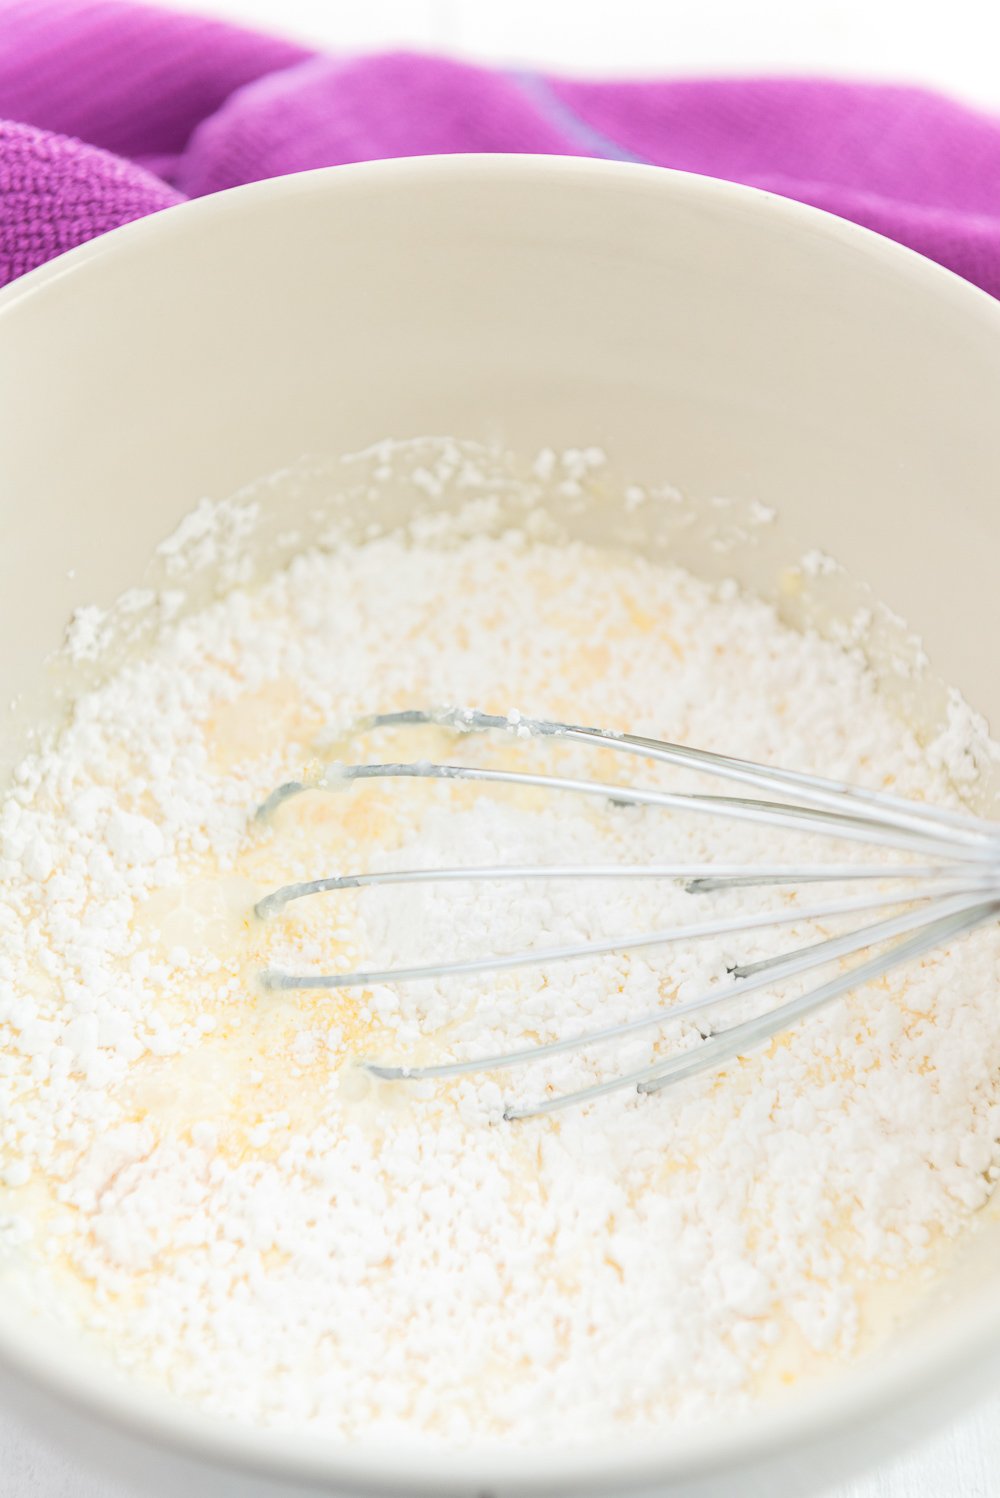 Heavy cream, sugar, and other pastry cream ingredients being mixed in a white bowl.